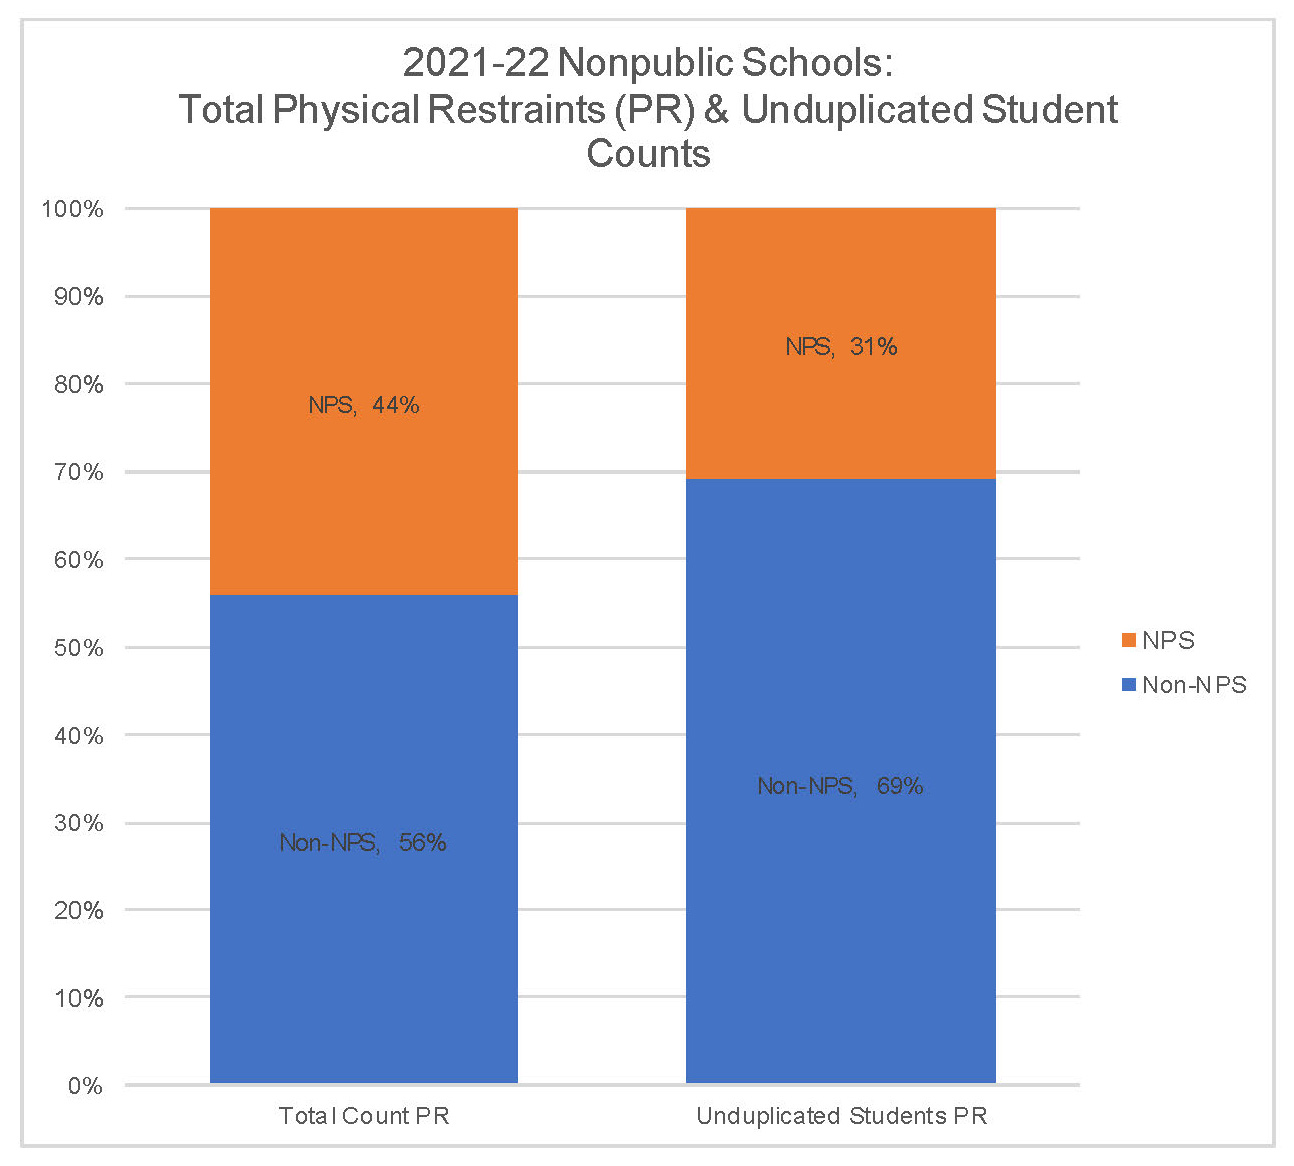 The image on the left is a bar graph depicting the total count of physical restraints in the 2021-22 school year broken down by nonpublic school enrollment. California students attending nonpublic schools (orange graph) accounted for 44.0% of all physical restraints and students attending other students (dark blue) accounted for 56.0%. The image on the right is a bar graph depicting the unduplicated count of students physically restrained during the 2021-22 school year broken down by nonpublic school enrollment. California students attending nonpublic schools (orange graph) accounted for 31.0% of all students physically restrained and students attending other students (dark blue) accounted for 69.0%.